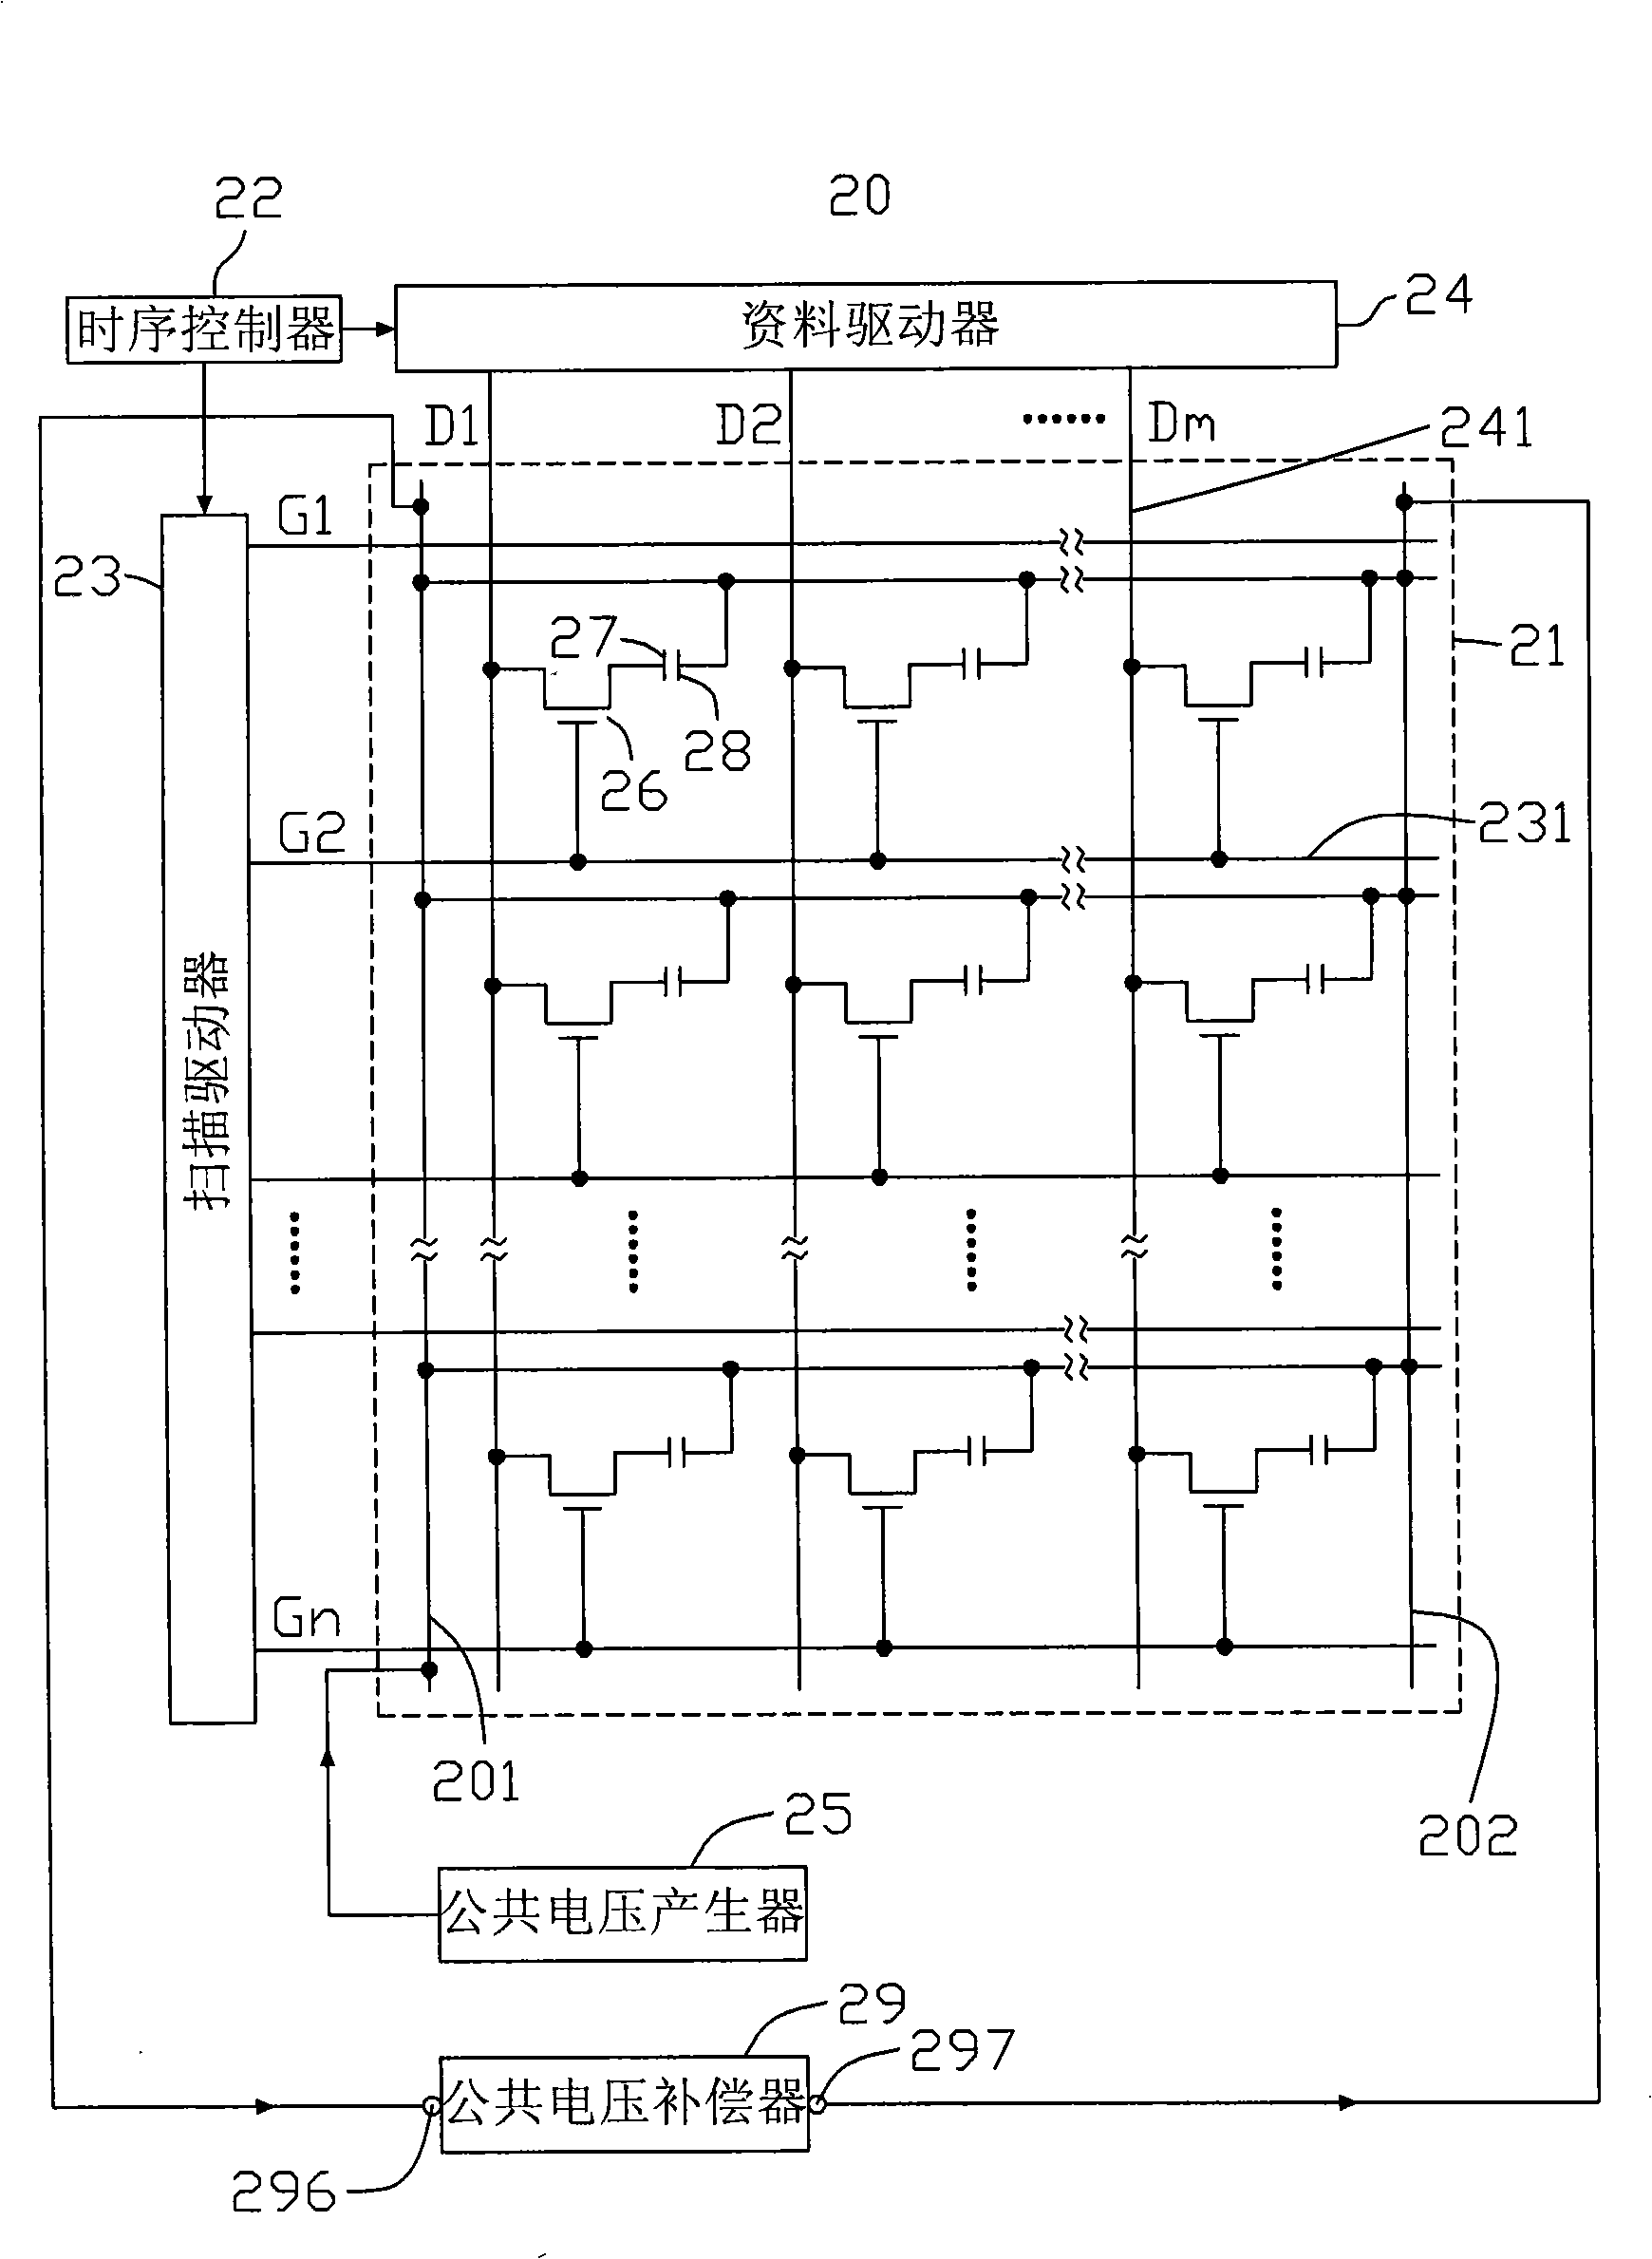 LCD device and its public voltage drive method